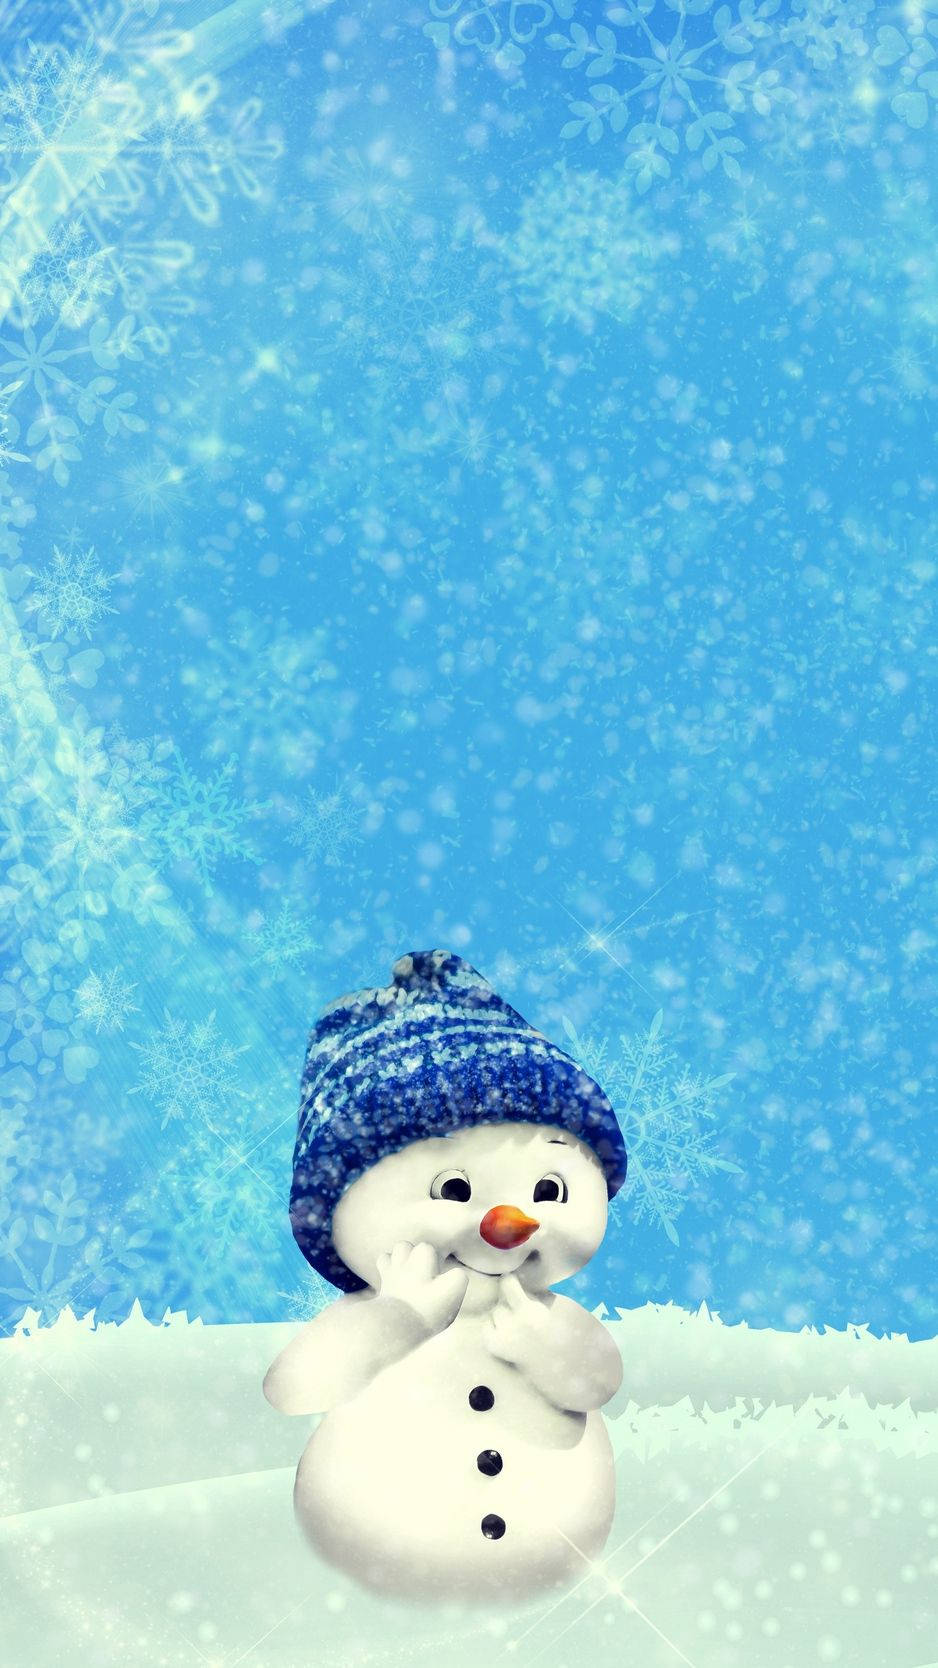 Snow is more magical when it’s cute! Wallpaper